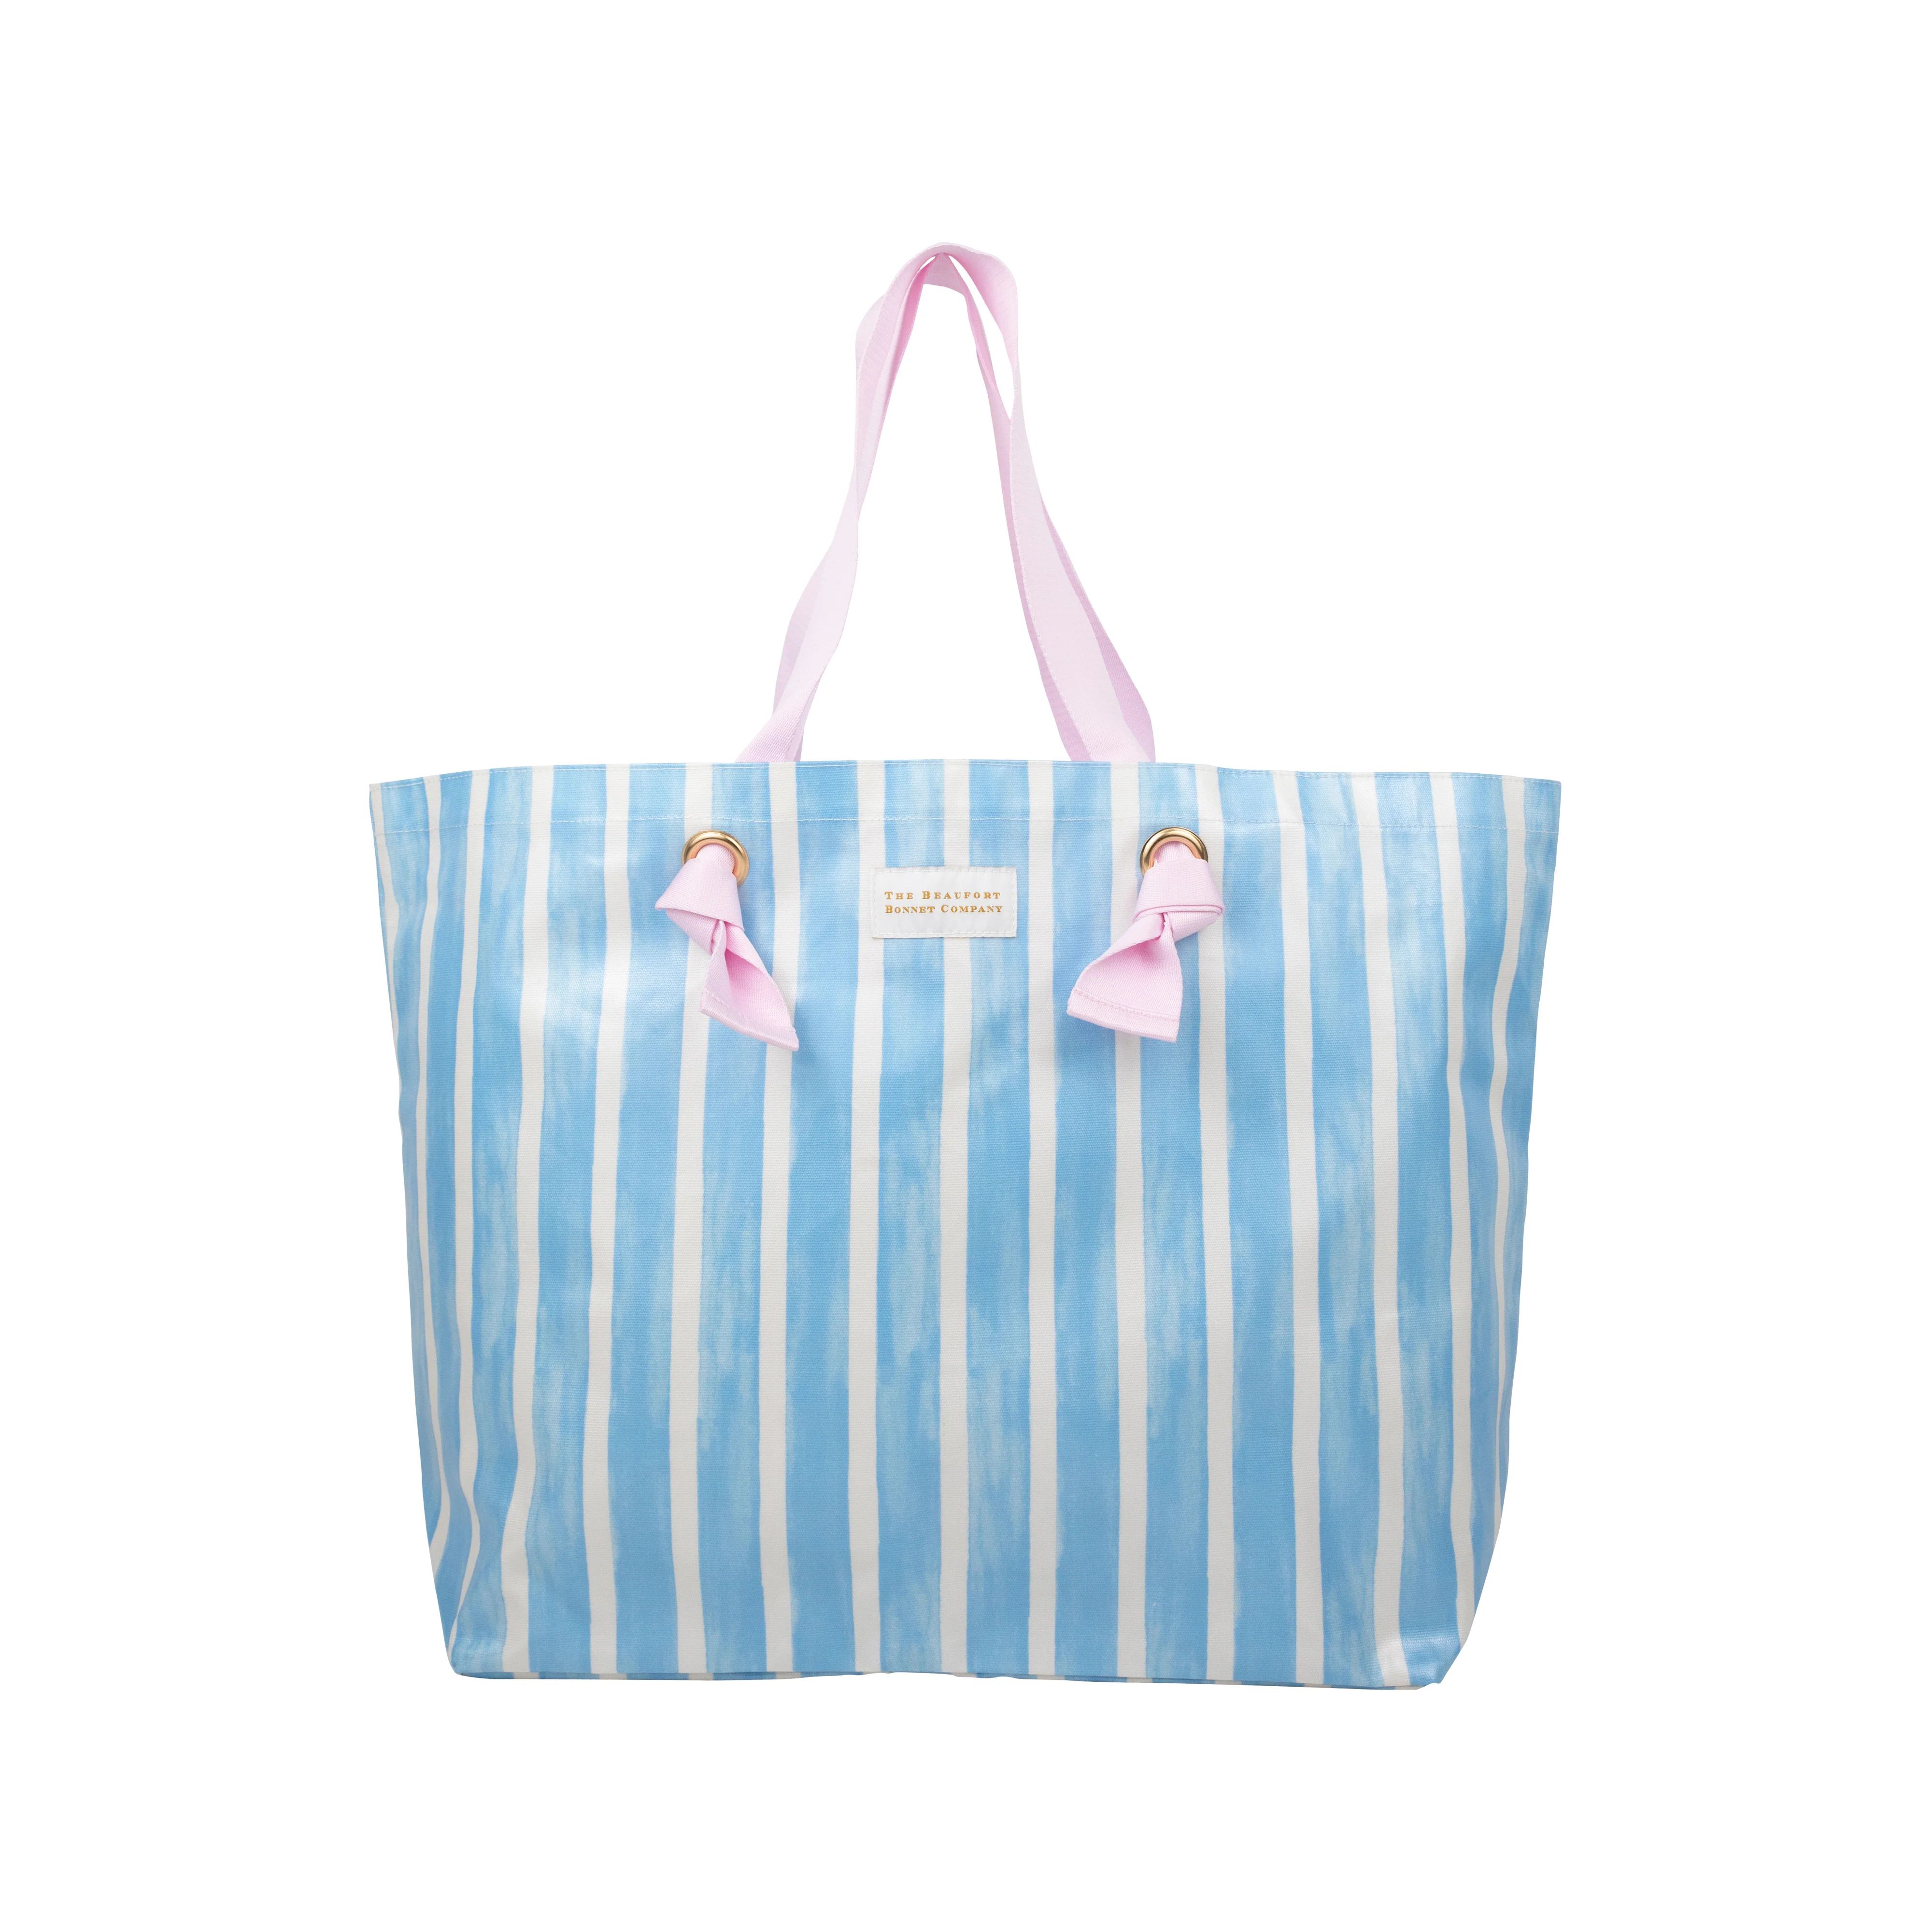 Isabelle Beach Bag - Sea Wall Stripe with Palm Beach Pink | The Beaufort Bonnet Company